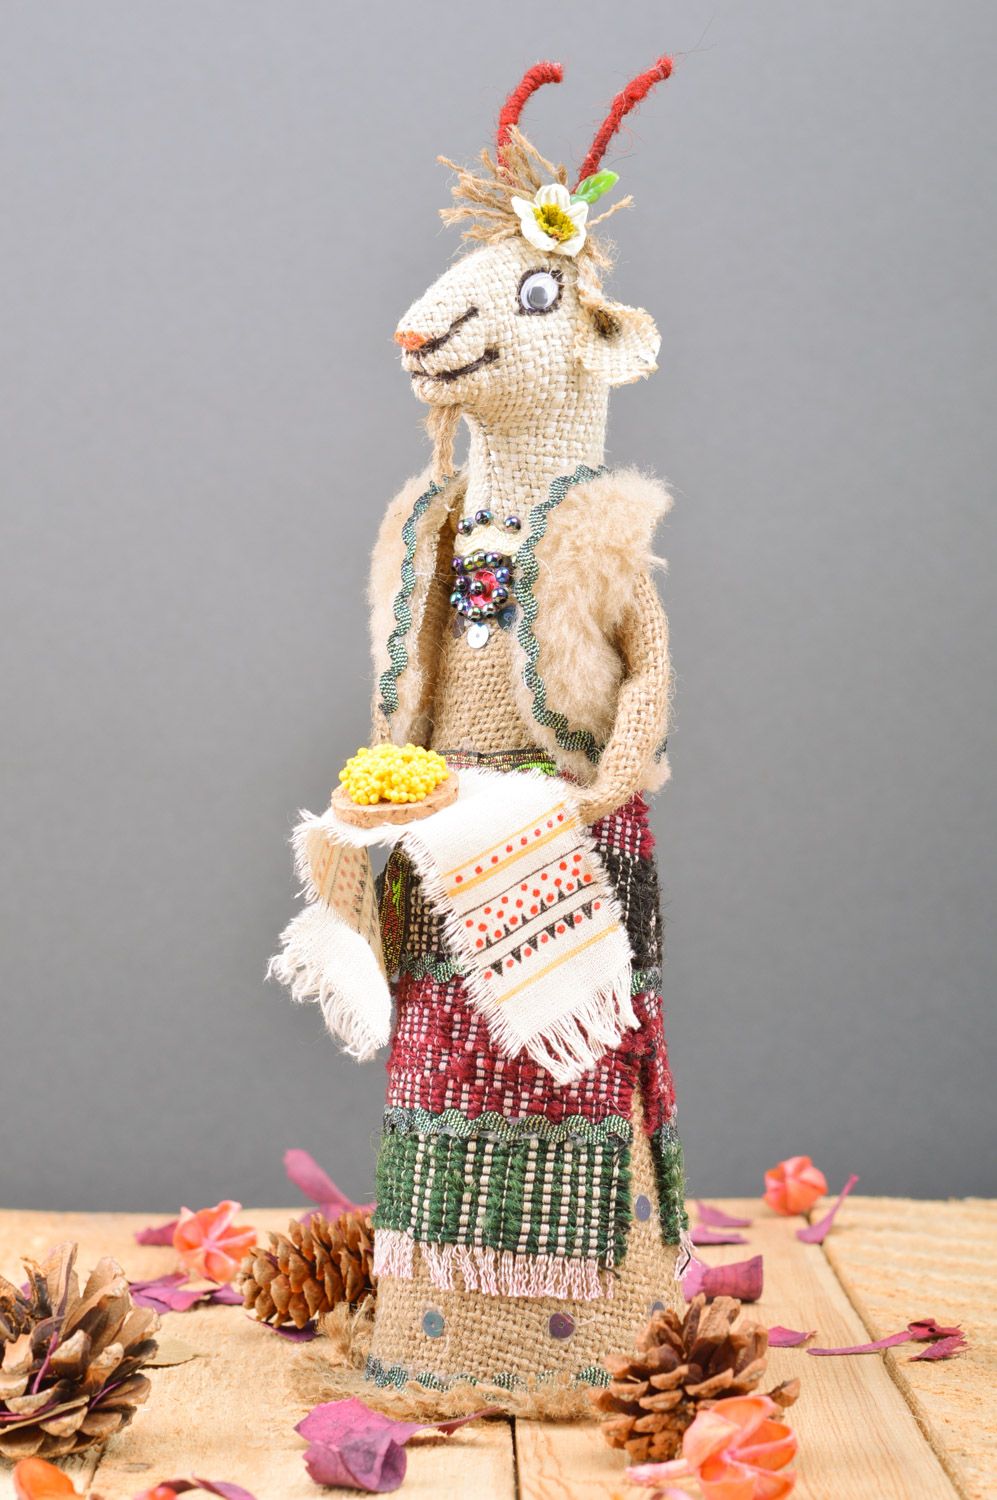 Handmade bottle cozy sewn of burlap Goat with Loaf on embroidered towel photo 3